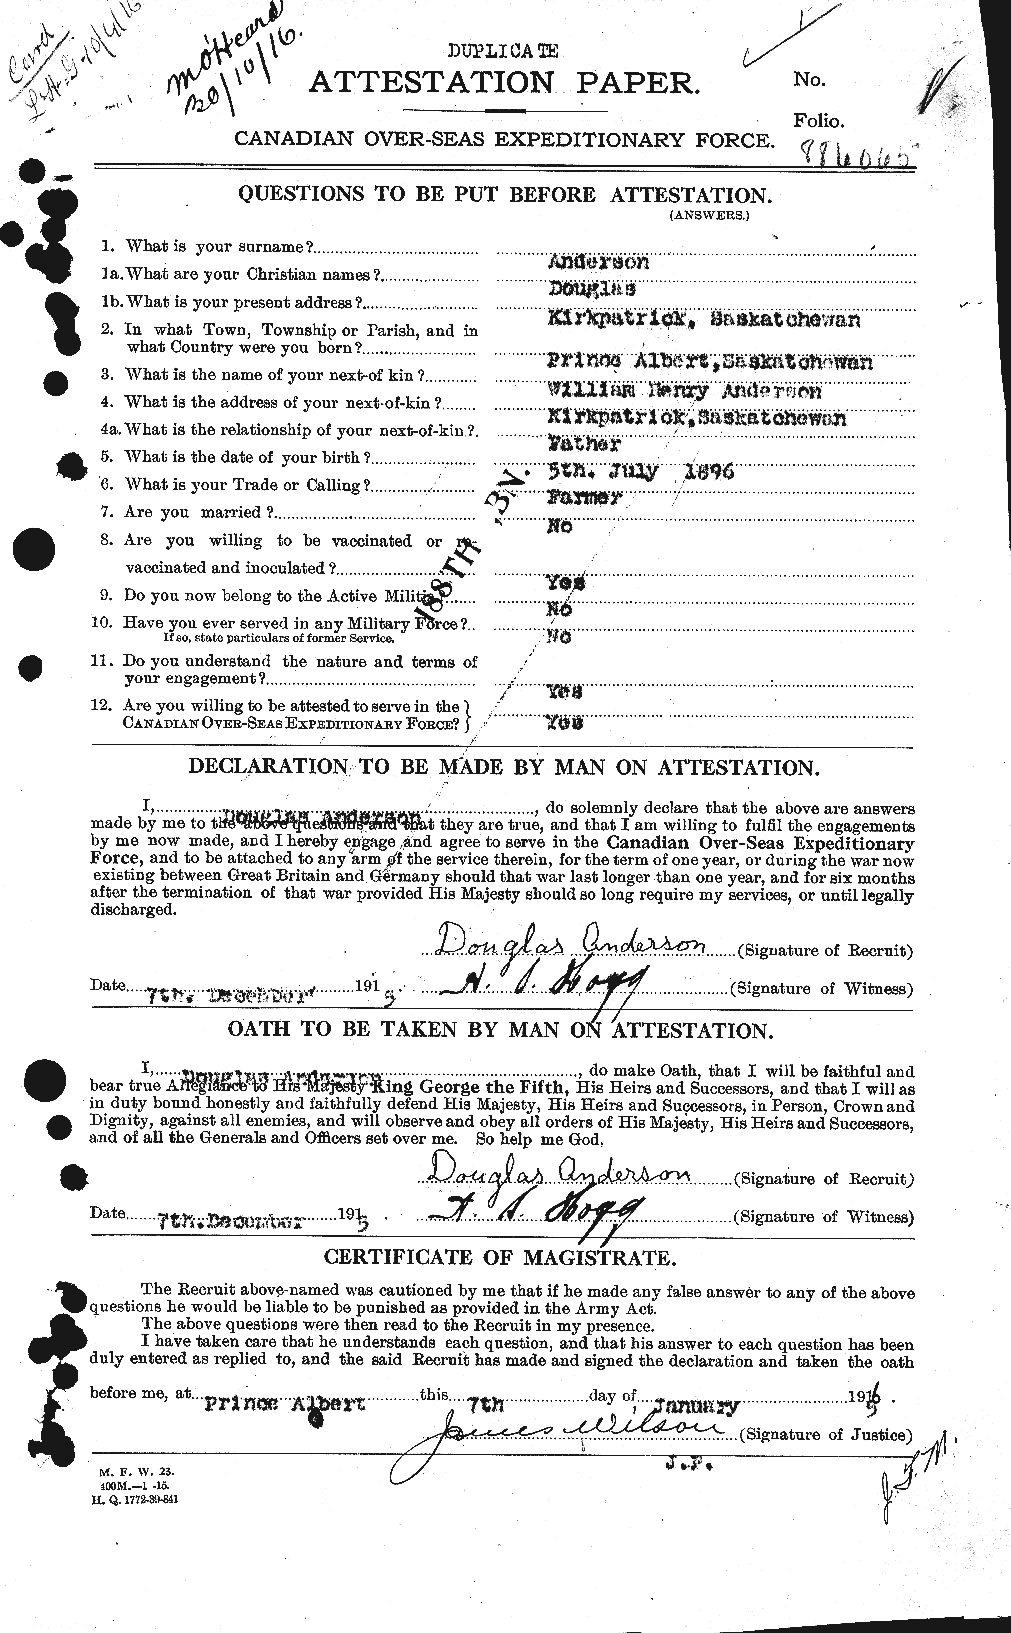 Personnel Records of the First World War - CEF 209976a